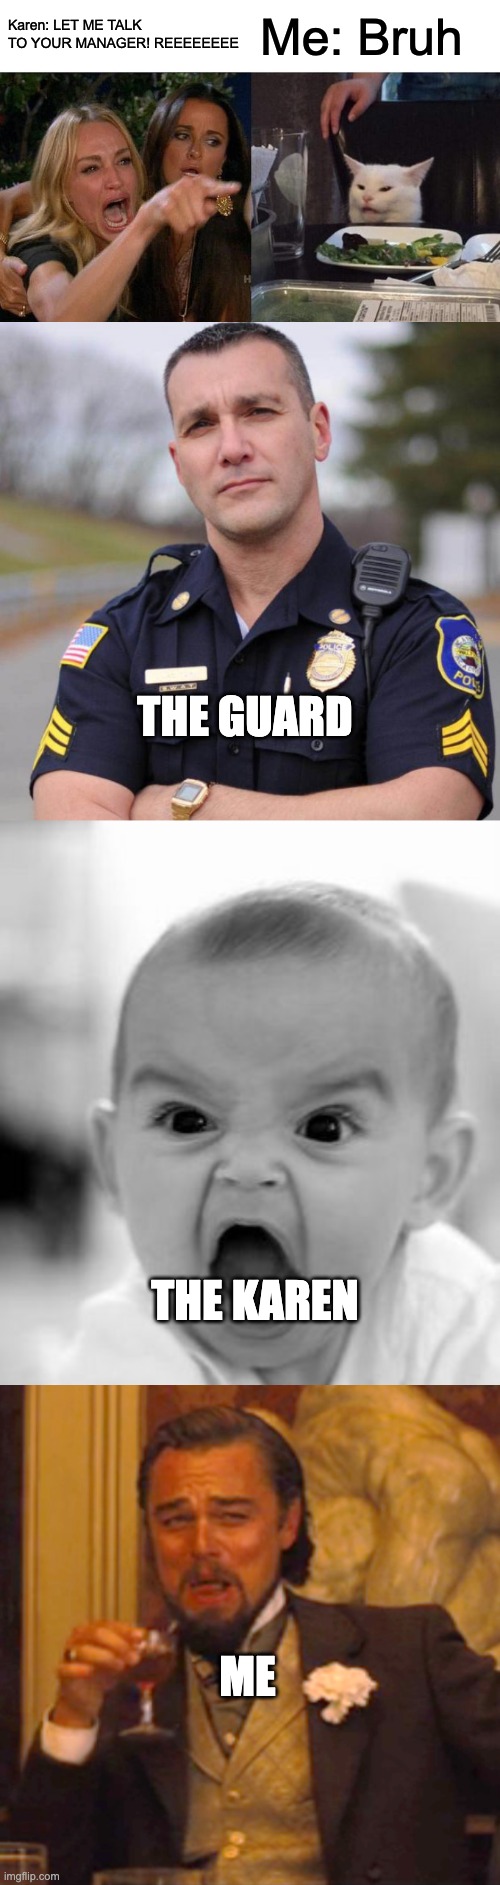 Bruh lol | Karen: LET ME TALK TO YOUR MANAGER! REEEEEEEE; Me: Bruh; THE GUARD; THE KAREN; ME | image tagged in memes,woman yelling at cat,cop,angry baby,laughing leo,funny | made w/ Imgflip meme maker